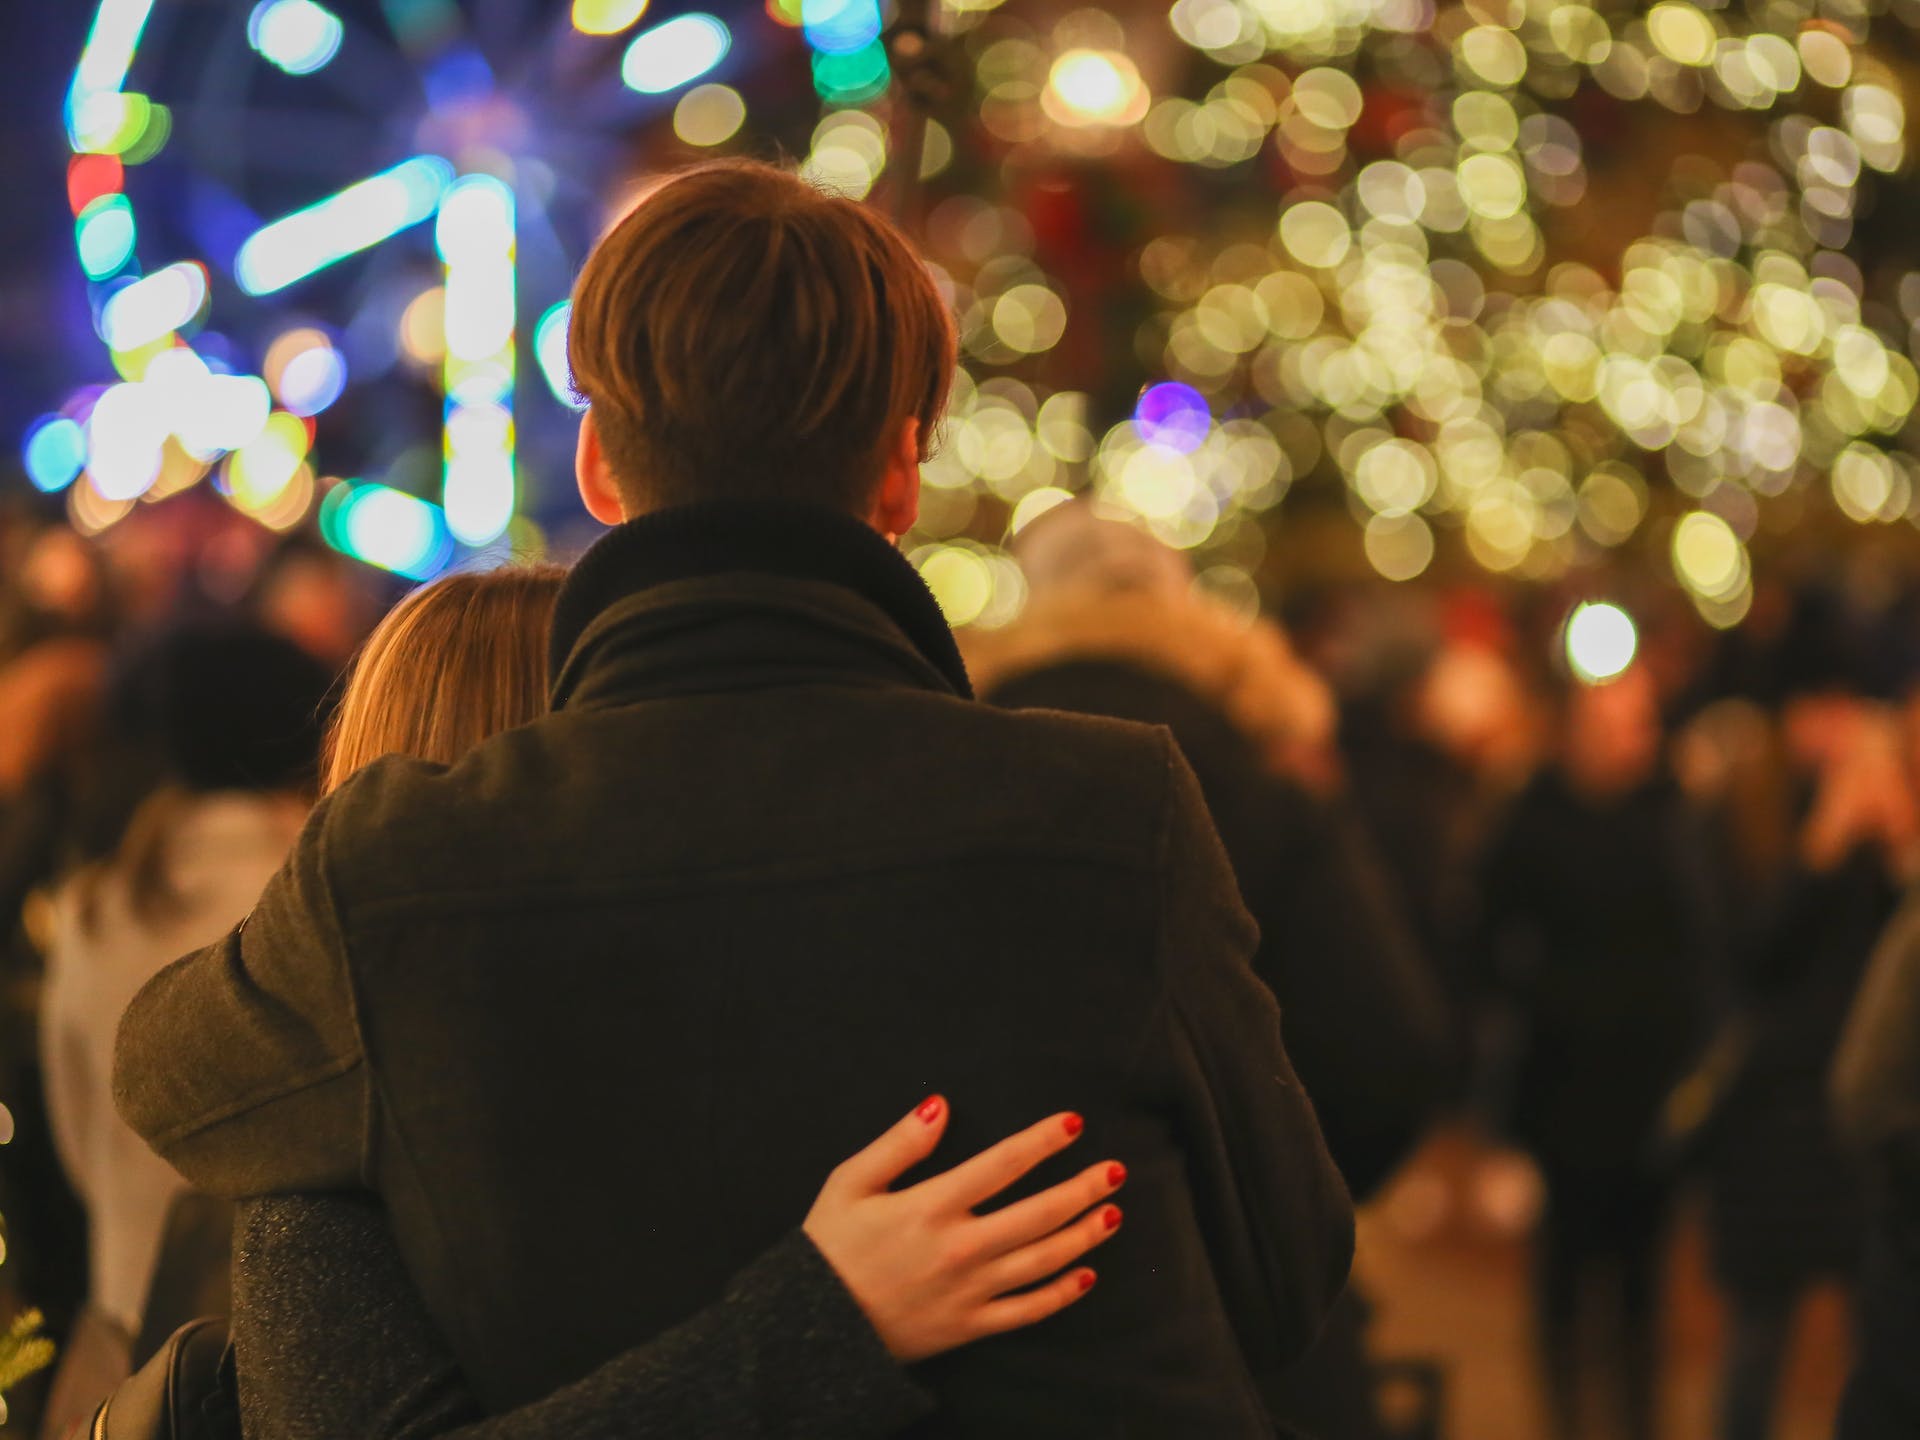 The backs of a couple looking at lights | Source: Pexels